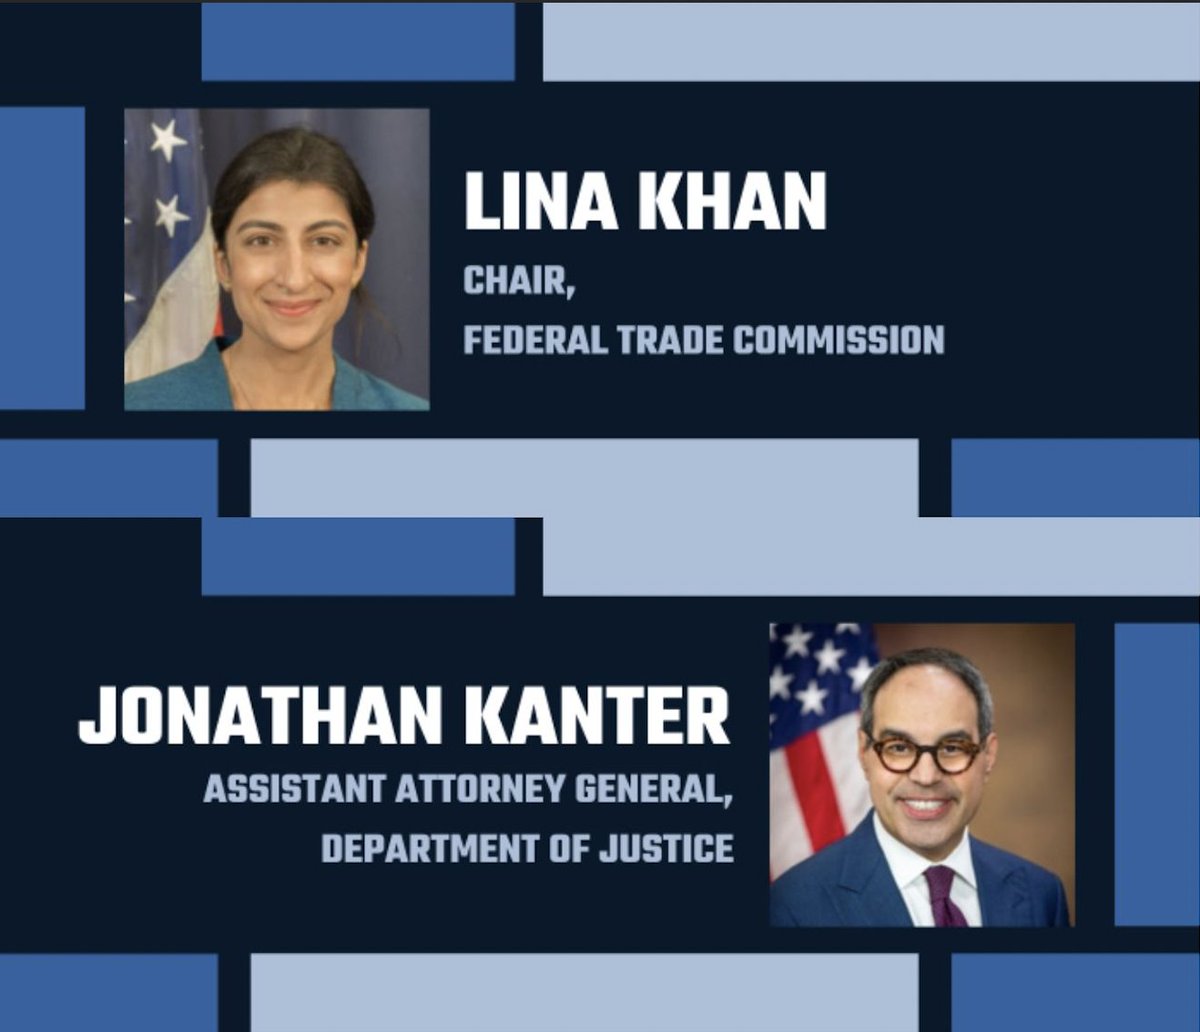 We're thrilled to announce @linakhanFTC and @JusticeATR AAG Jonathan Kanter will be speaking at the Anti-Monopoly Summit on May 21st! They'll join @SenWarren, @chopracfpb and many others—see the full updated speakers list and get tickets here.👇 tickettailor.com/events/america…